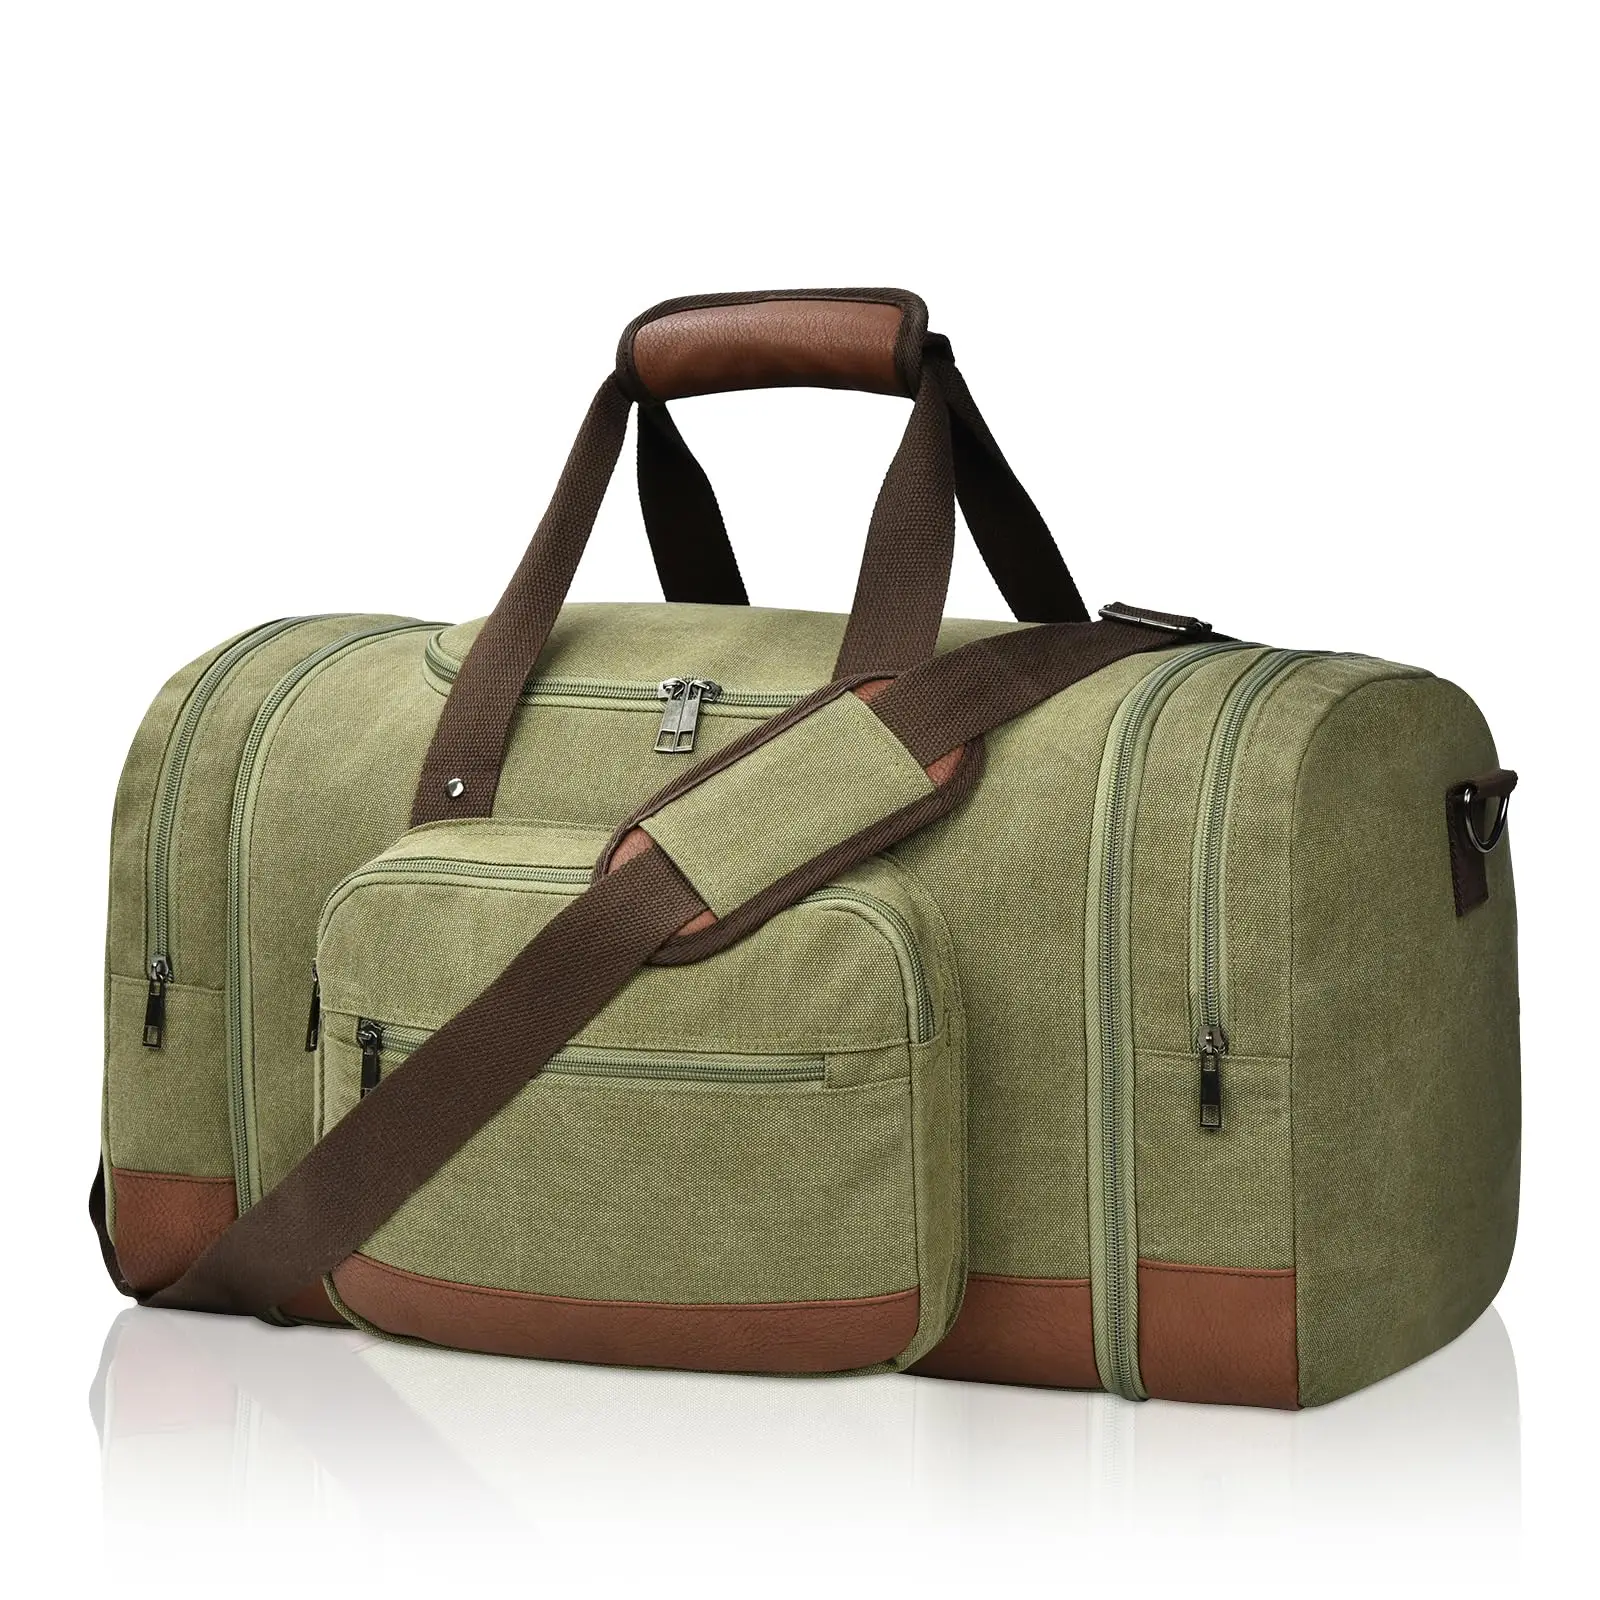 

Travel Duffel , Carry-on Men's Travel Canvas Duffle Overnight Weekend Gym Carry-on Duffle Army